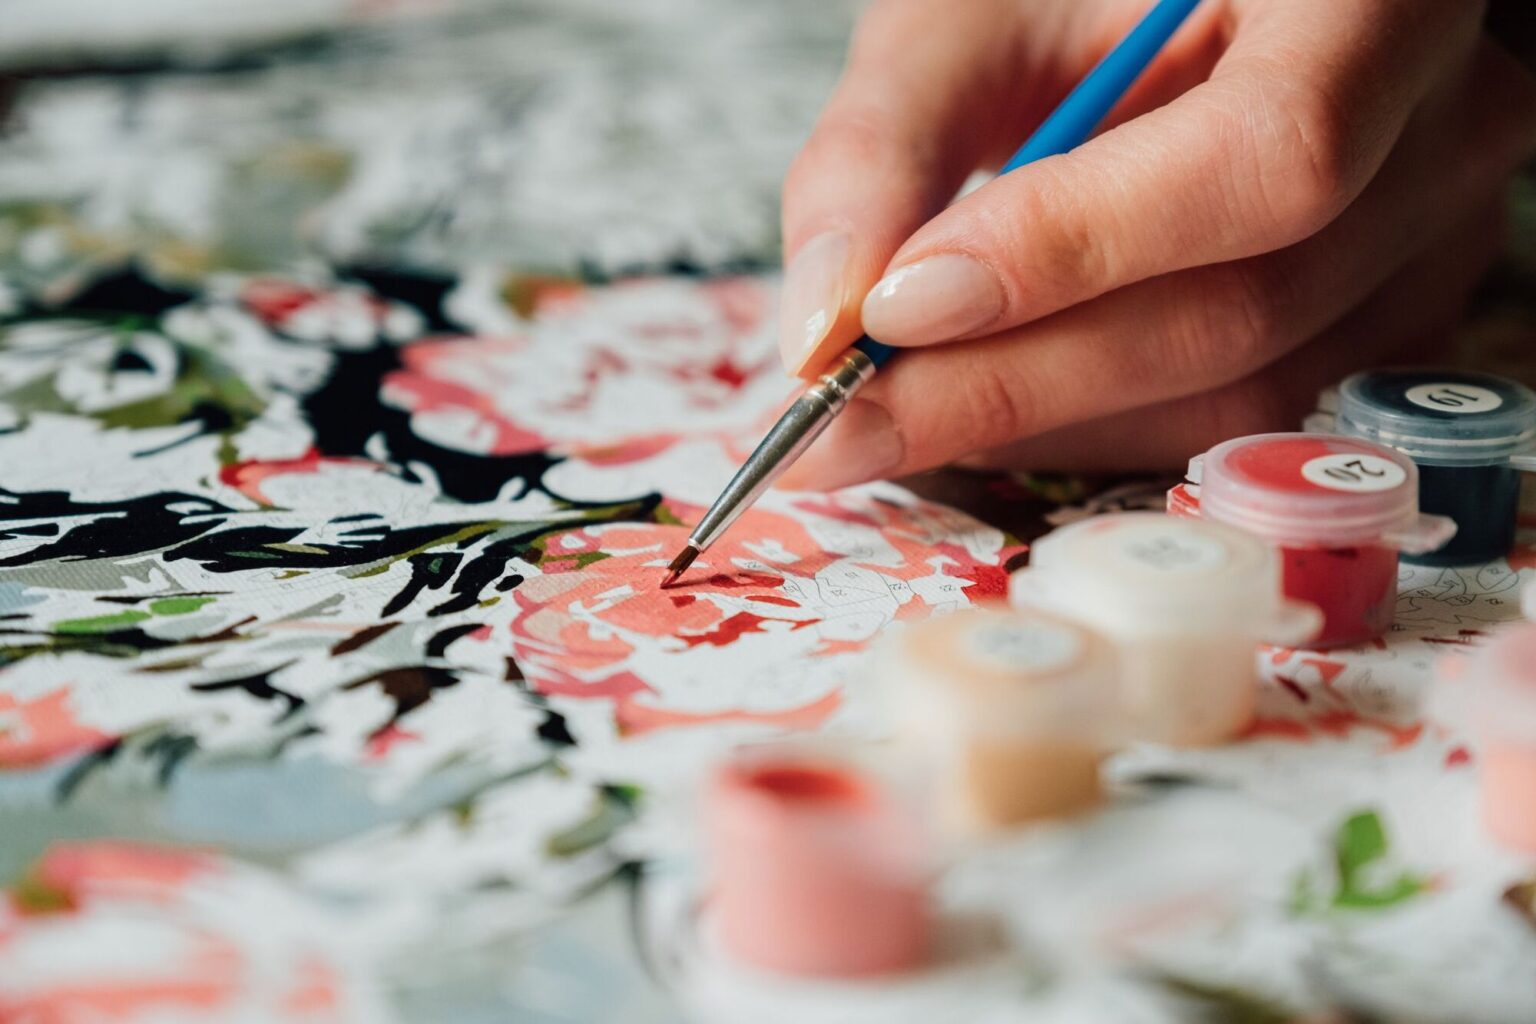 Are you an artistic person? Using paint by numbers, you can enjoy painting and boost your creativity! Here's how to get those creative juices flowing.